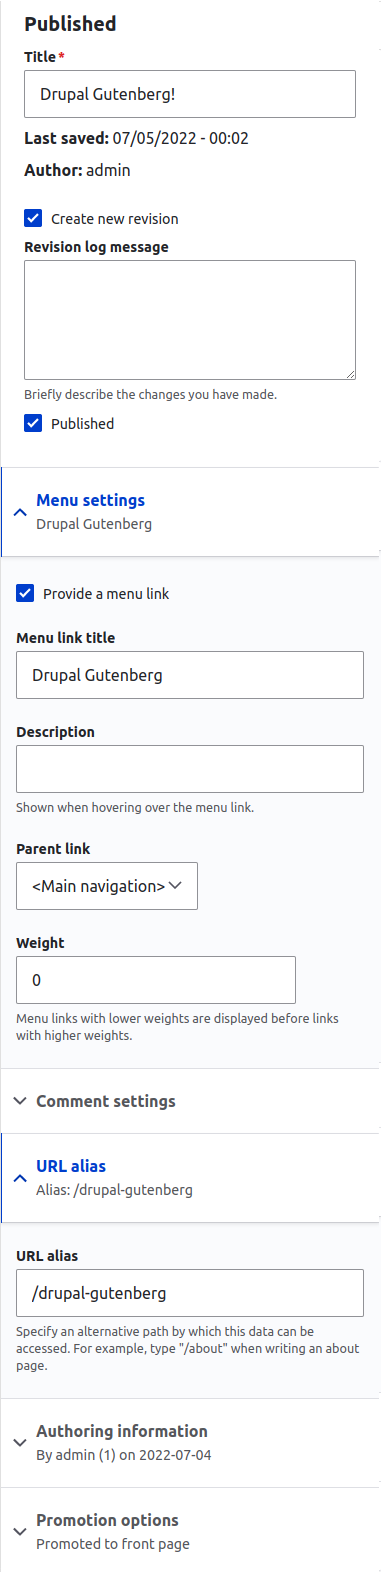 Populating basic content fields with data in the sidebar of the Gutenberg editor